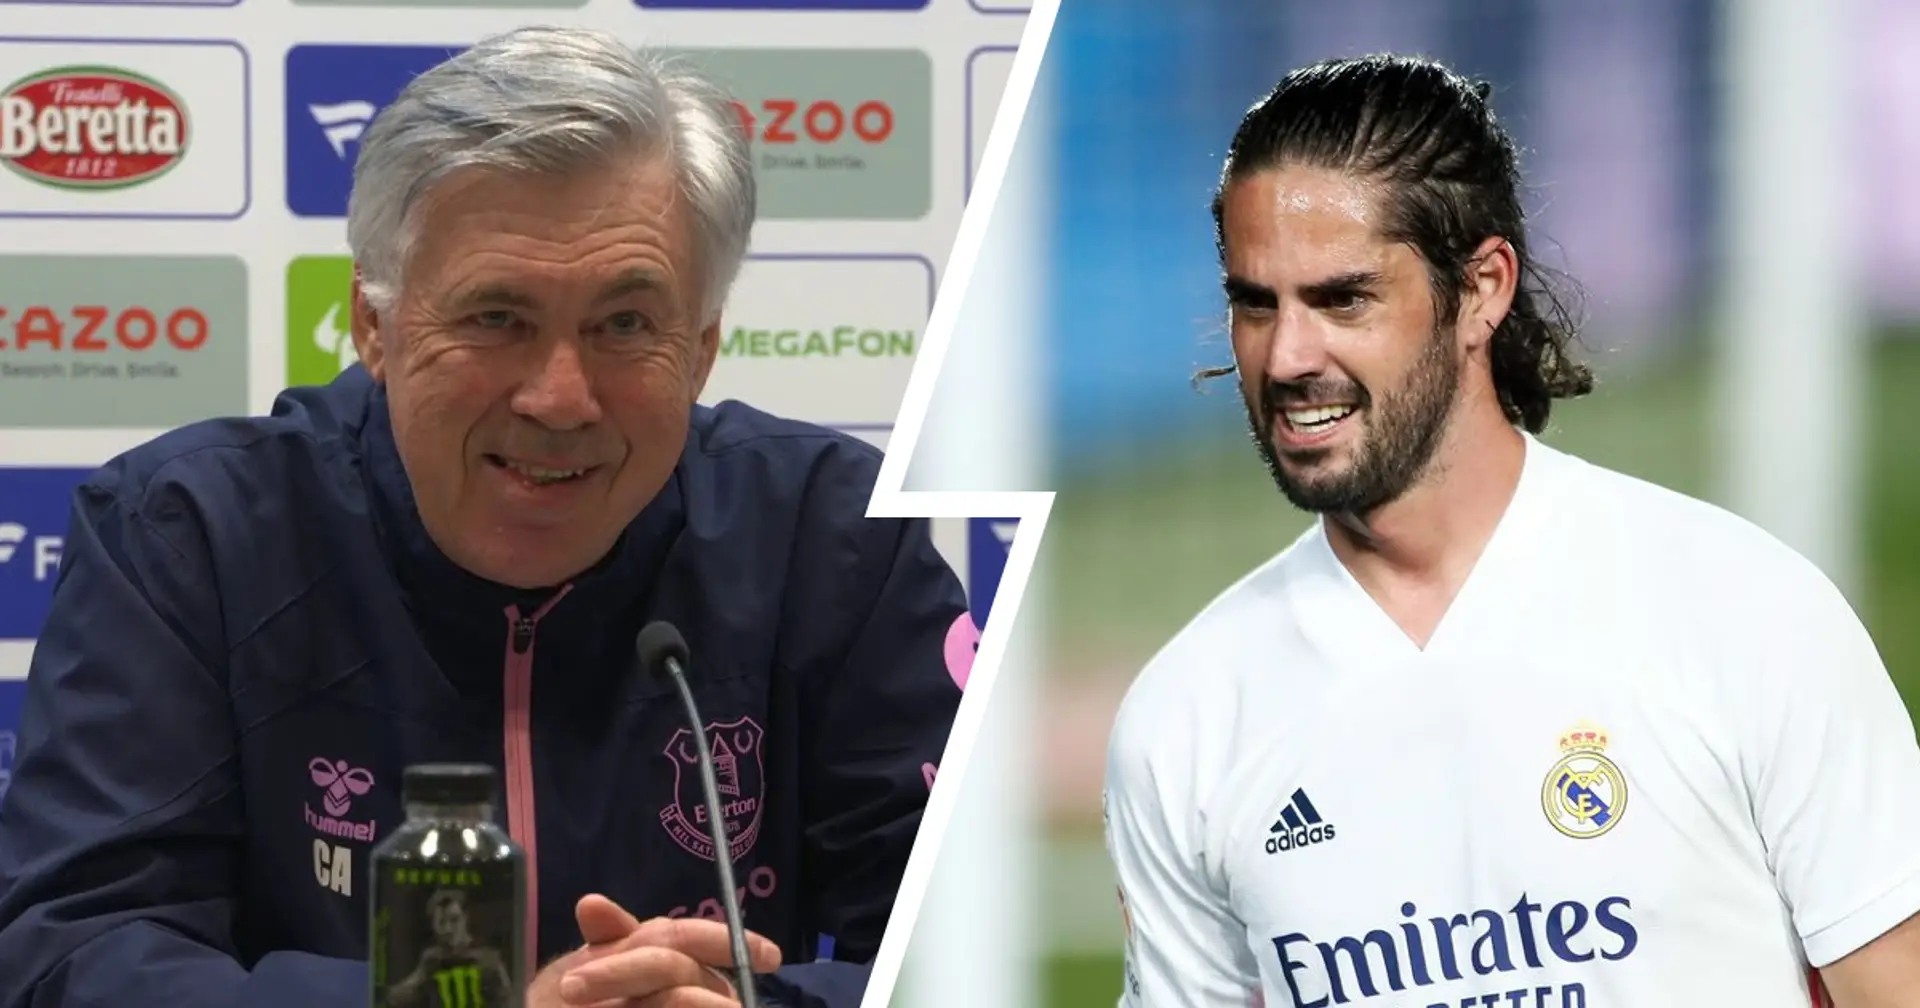 'Those comments are bulls**t': Carlo Ancelotti rubbishes rumours of Isco reunion at Everton